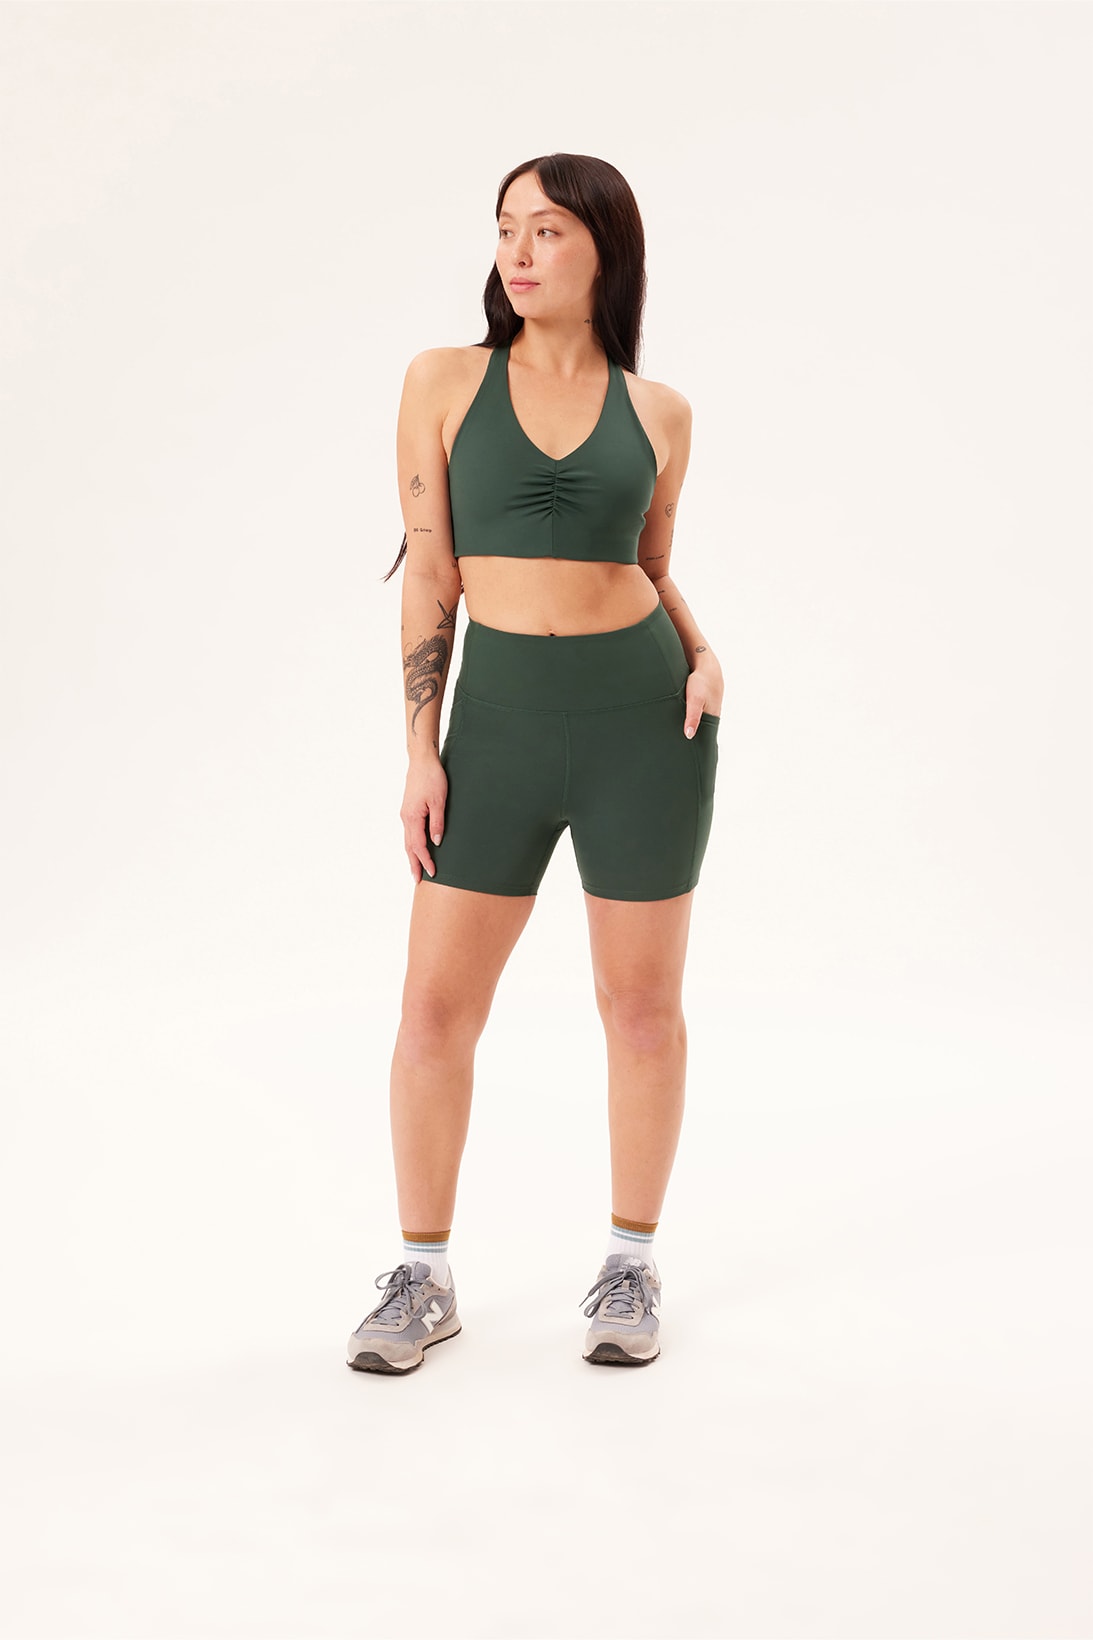 Girlfriend Collective Workout Gear Spring Launch